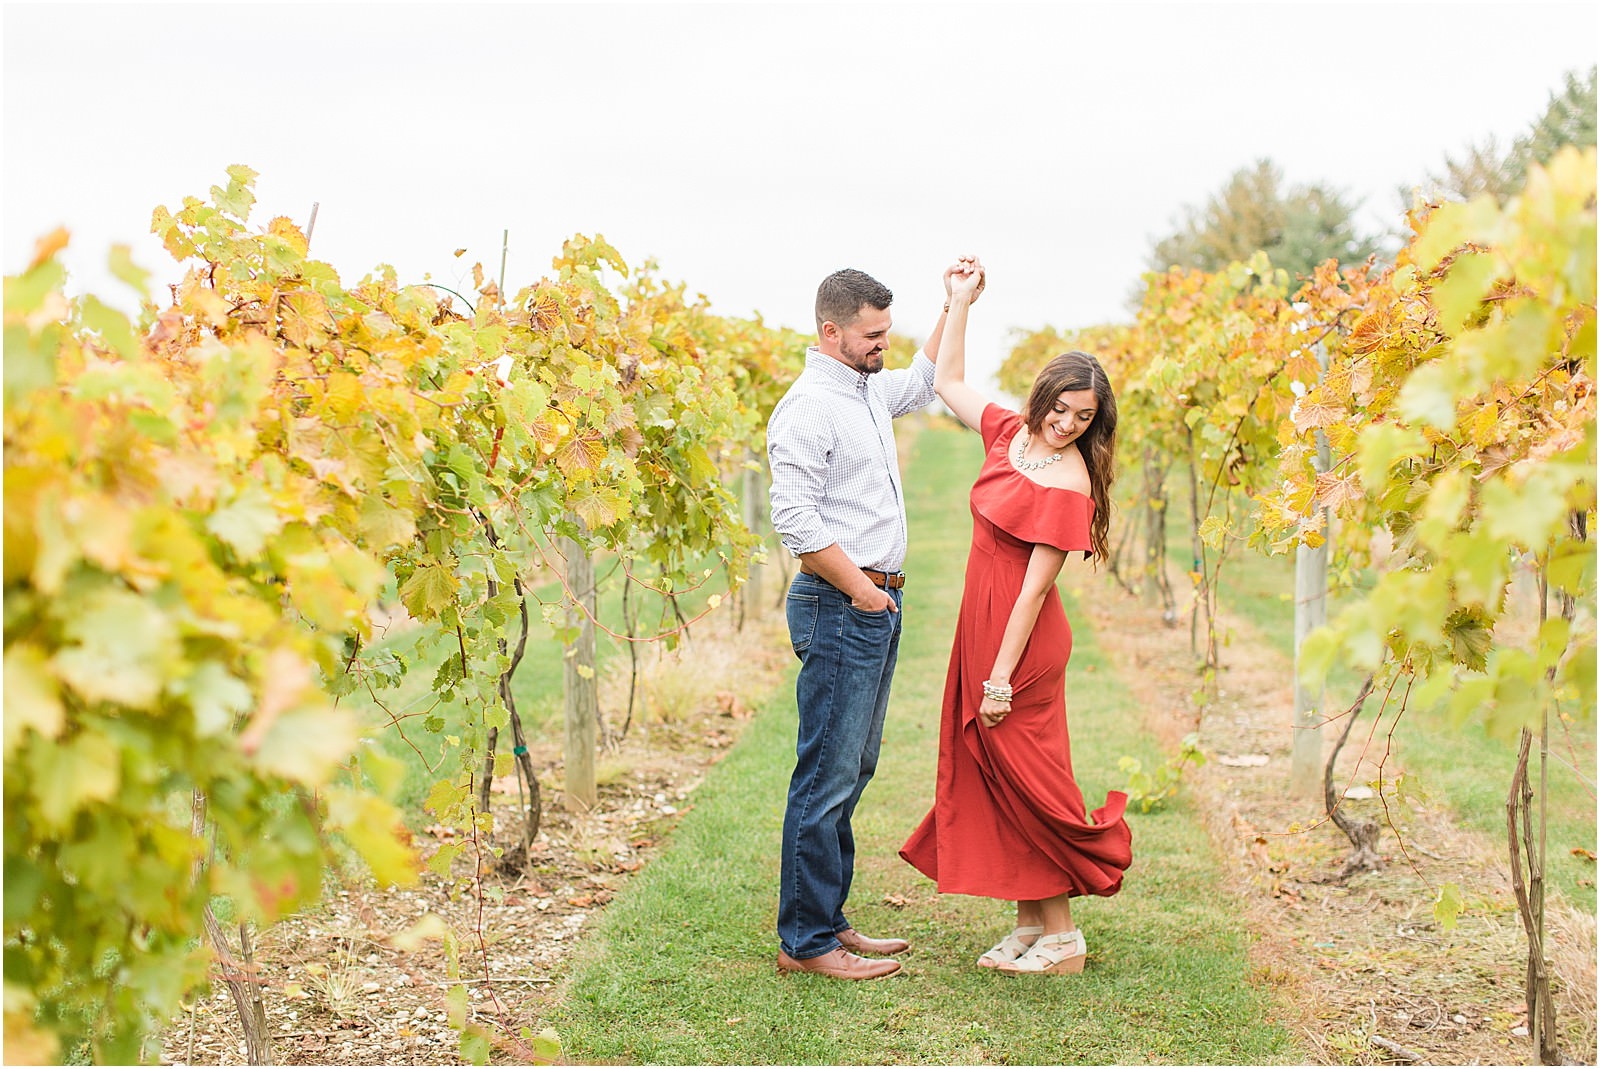 A Fall Oliver Winery Engagement Session | Sally and Andrew | Bret and Brandie Photography 0043.jpg